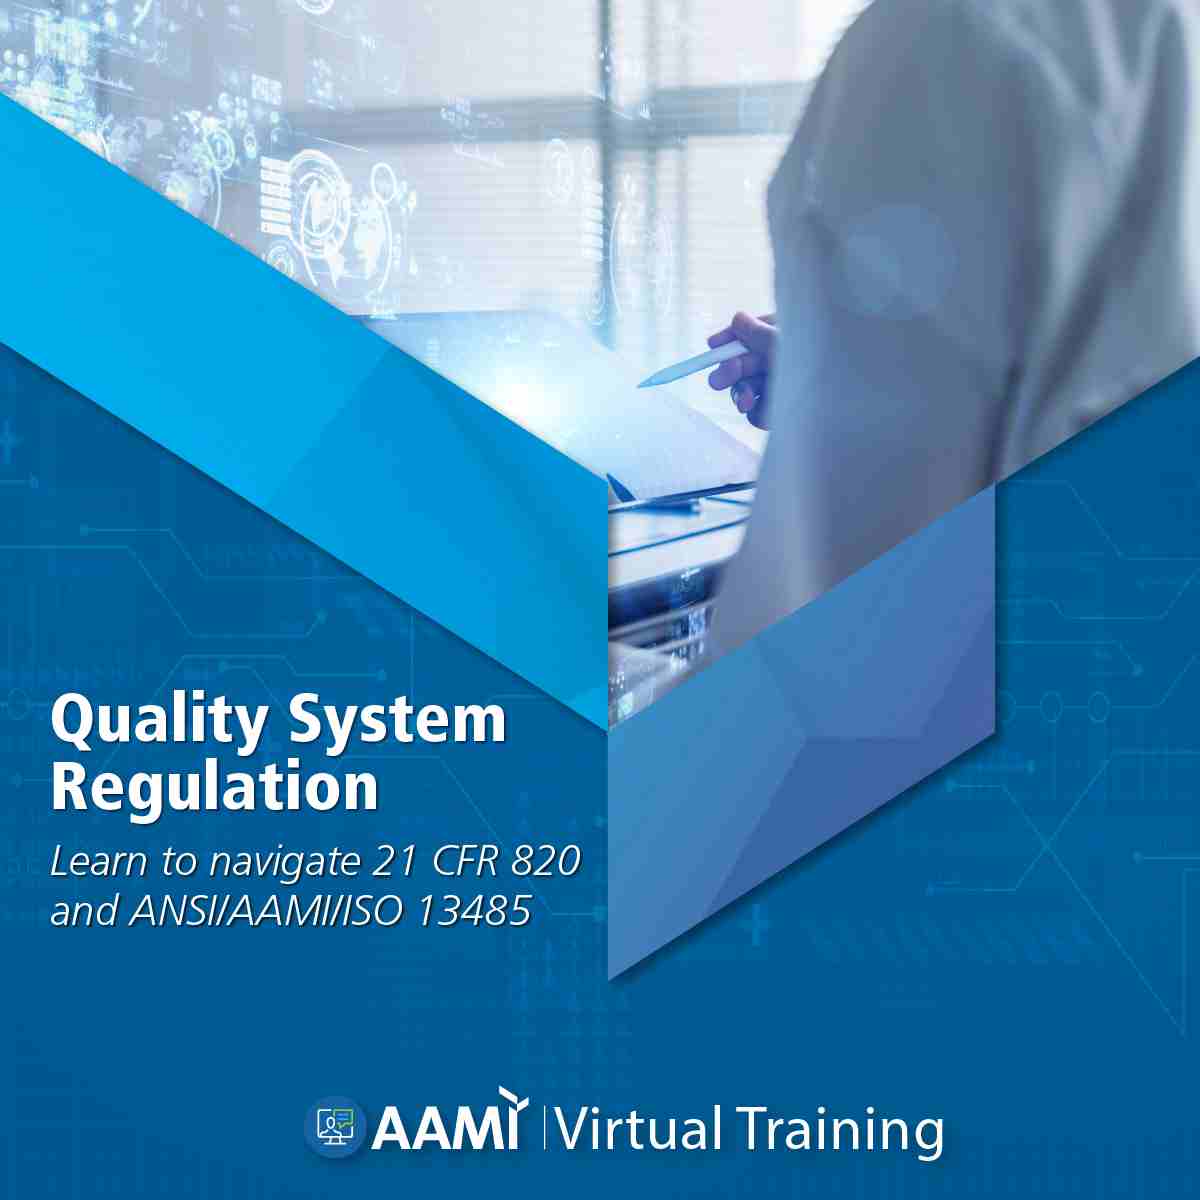 Quality System Regulation 21 CFR 820 and ANSI/AAMI/ISO 13485: Navigating Regulatory Requirements